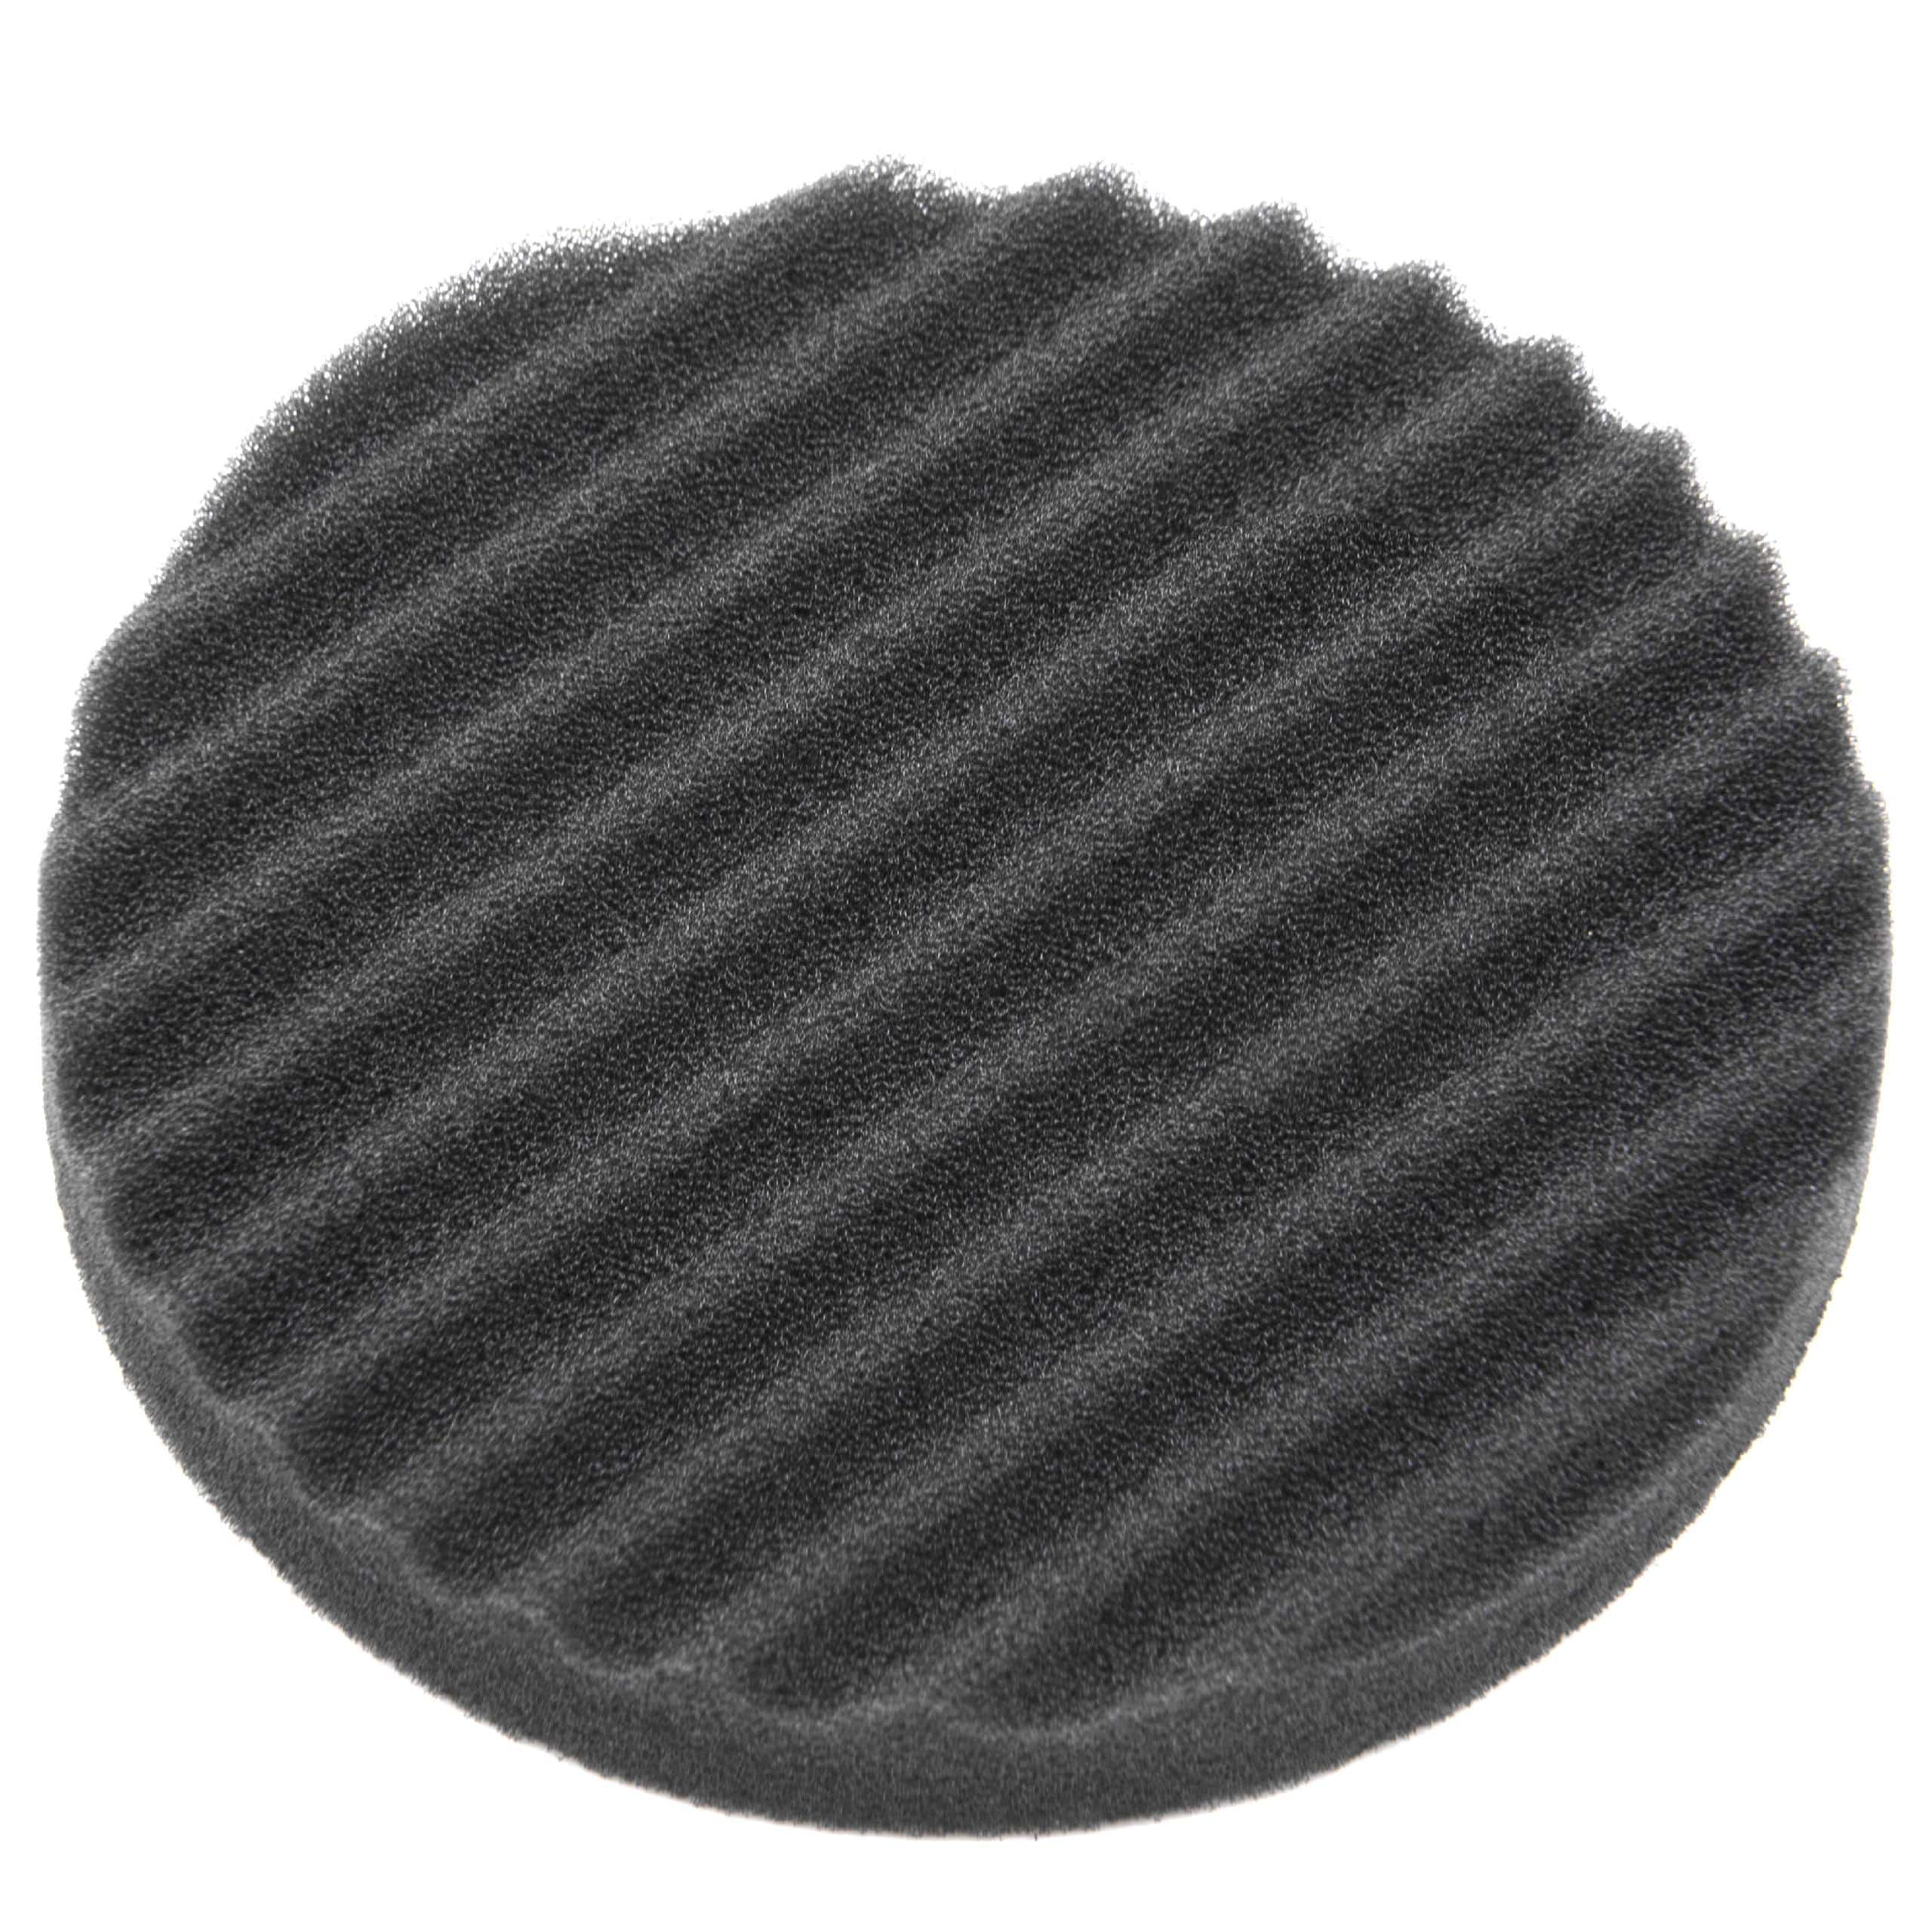 1x foam filter replaces Rowenta RS-RH5473 for RowentaVacuum Cleaner